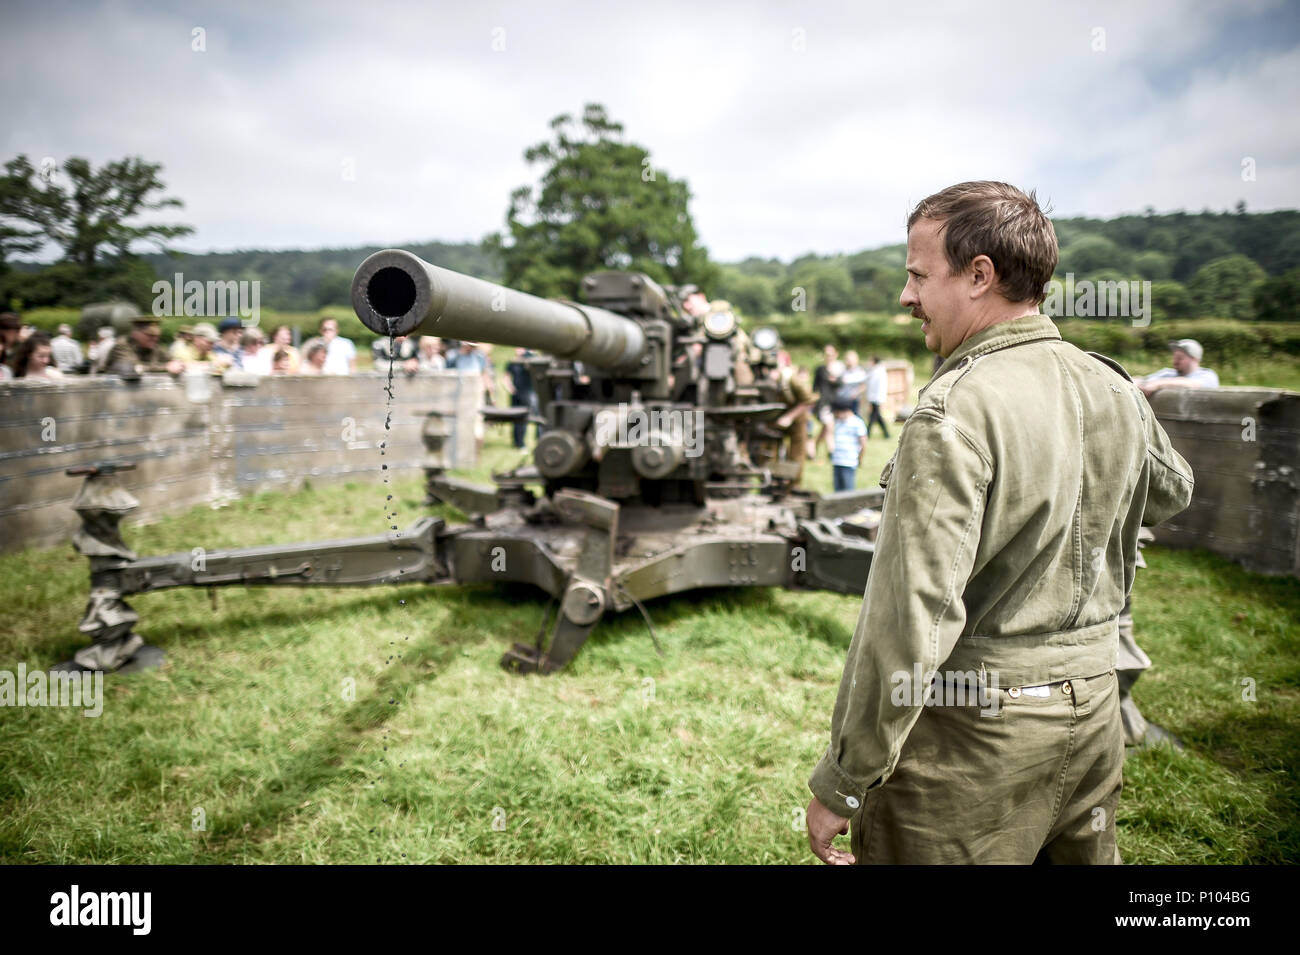 A man dressed as a WWII soldier checks for water at the end of an anti-aircraft gun after a firing demonstration at the Dig for Victory Show, a festival that celebrates the 1940's, at the North Somerset Ground, Wraxall, Somerset. Stock Photo